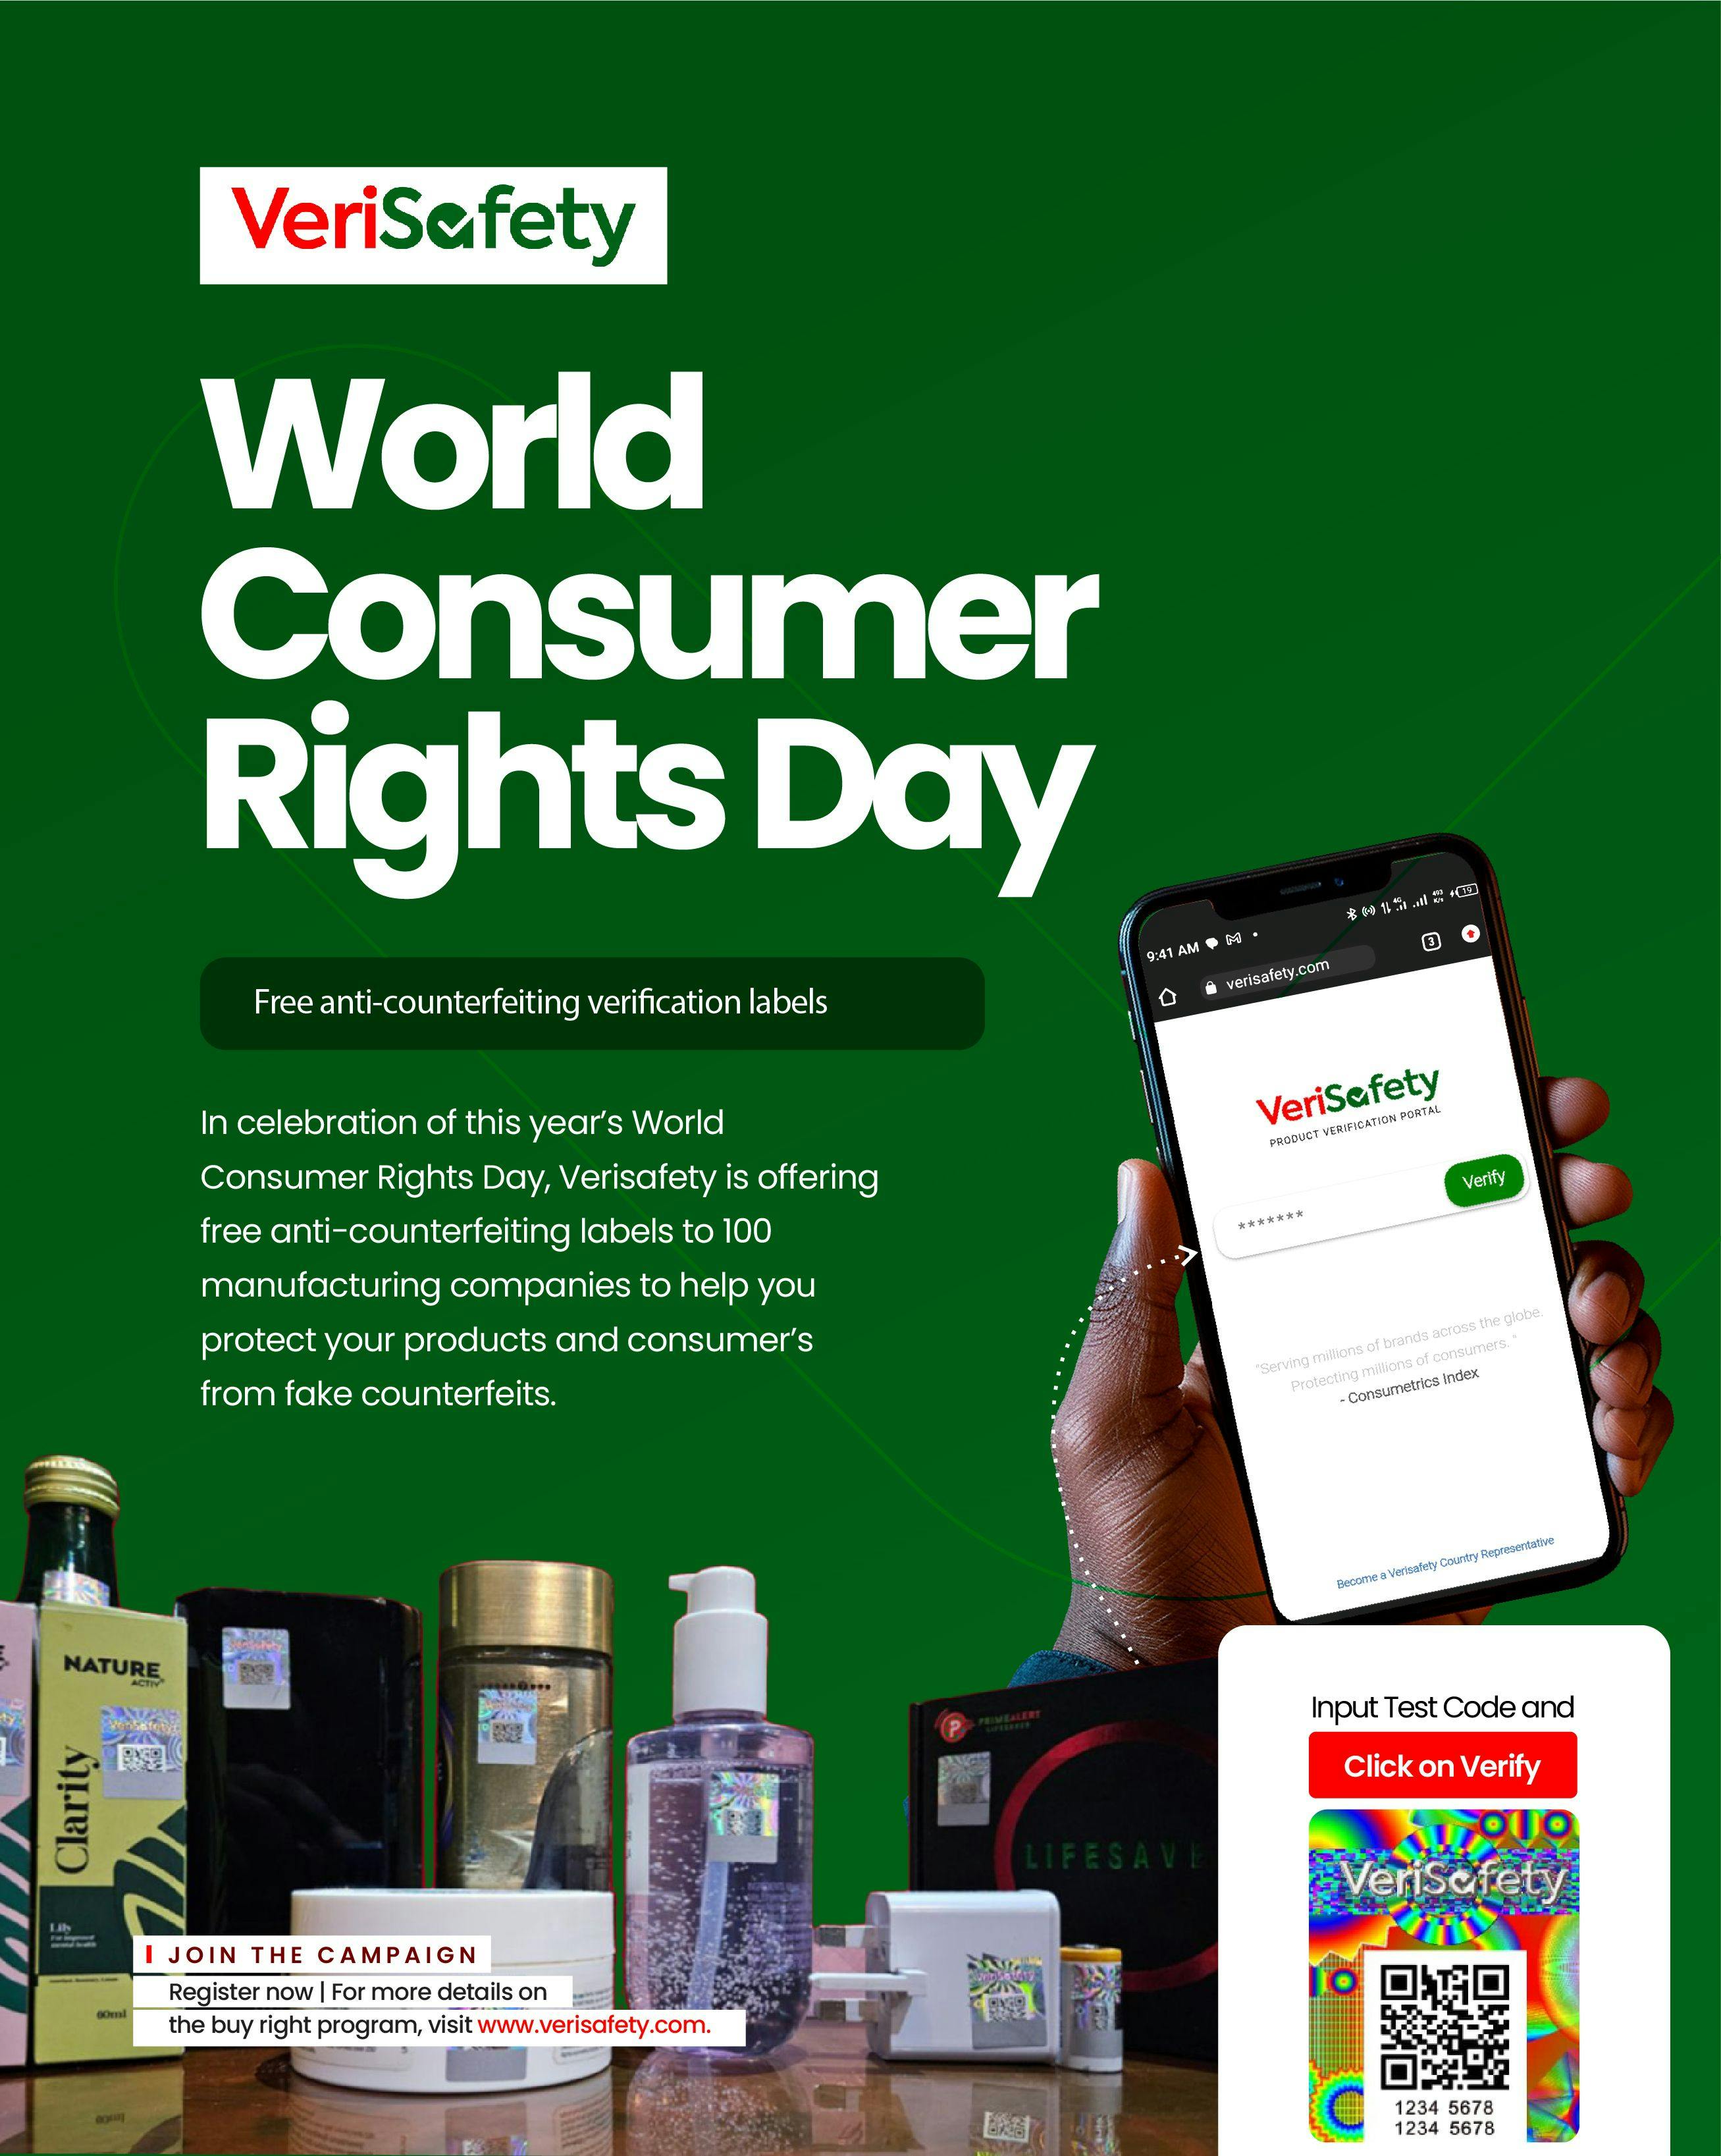 Verisafety Aims to Empower Manufacturers with Anti-counterfeiting Labels as World Consumer Day Approaches